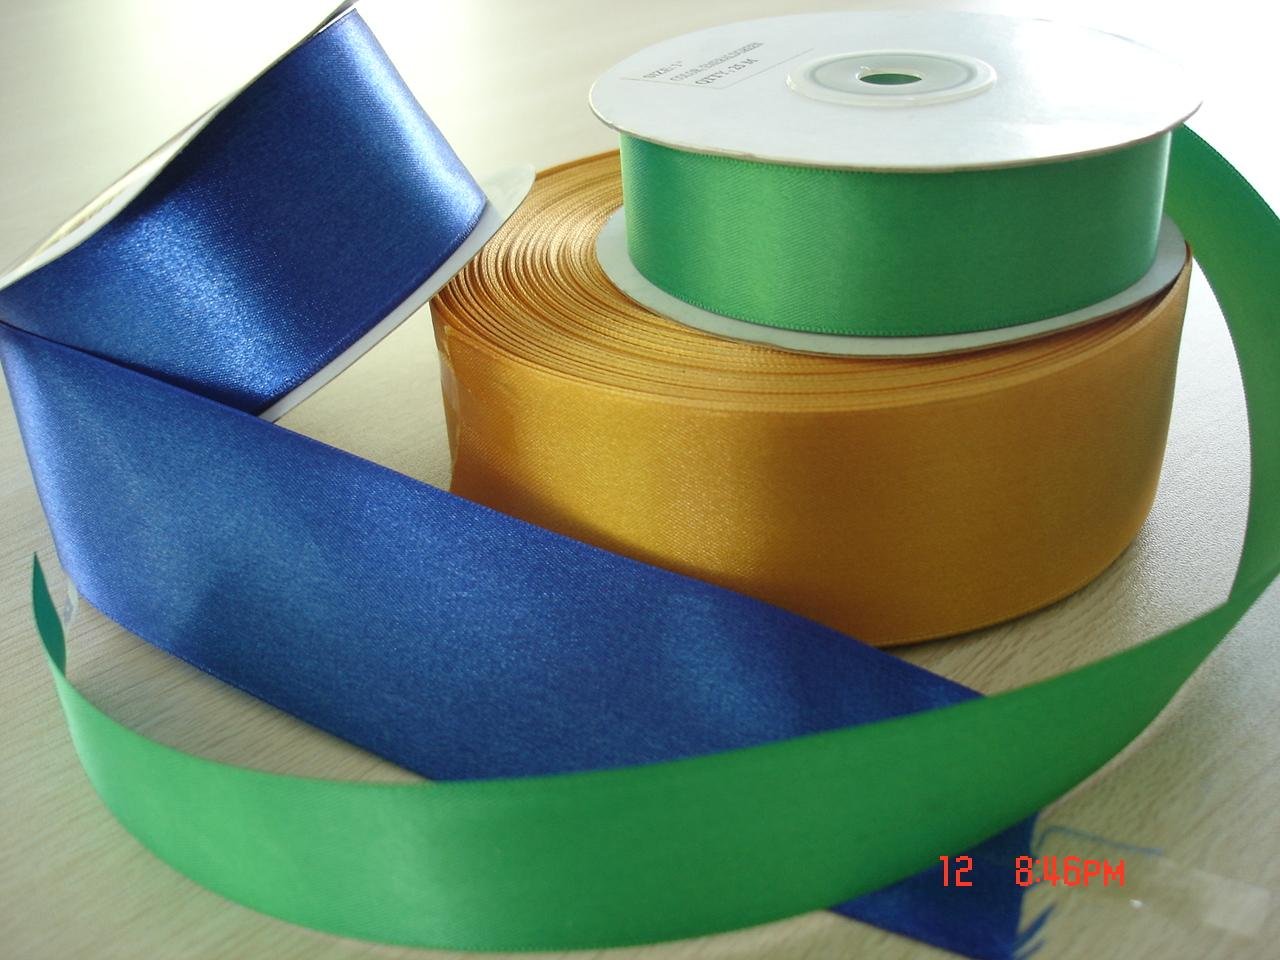 100% polyester wholesale satin ribbons factory in china